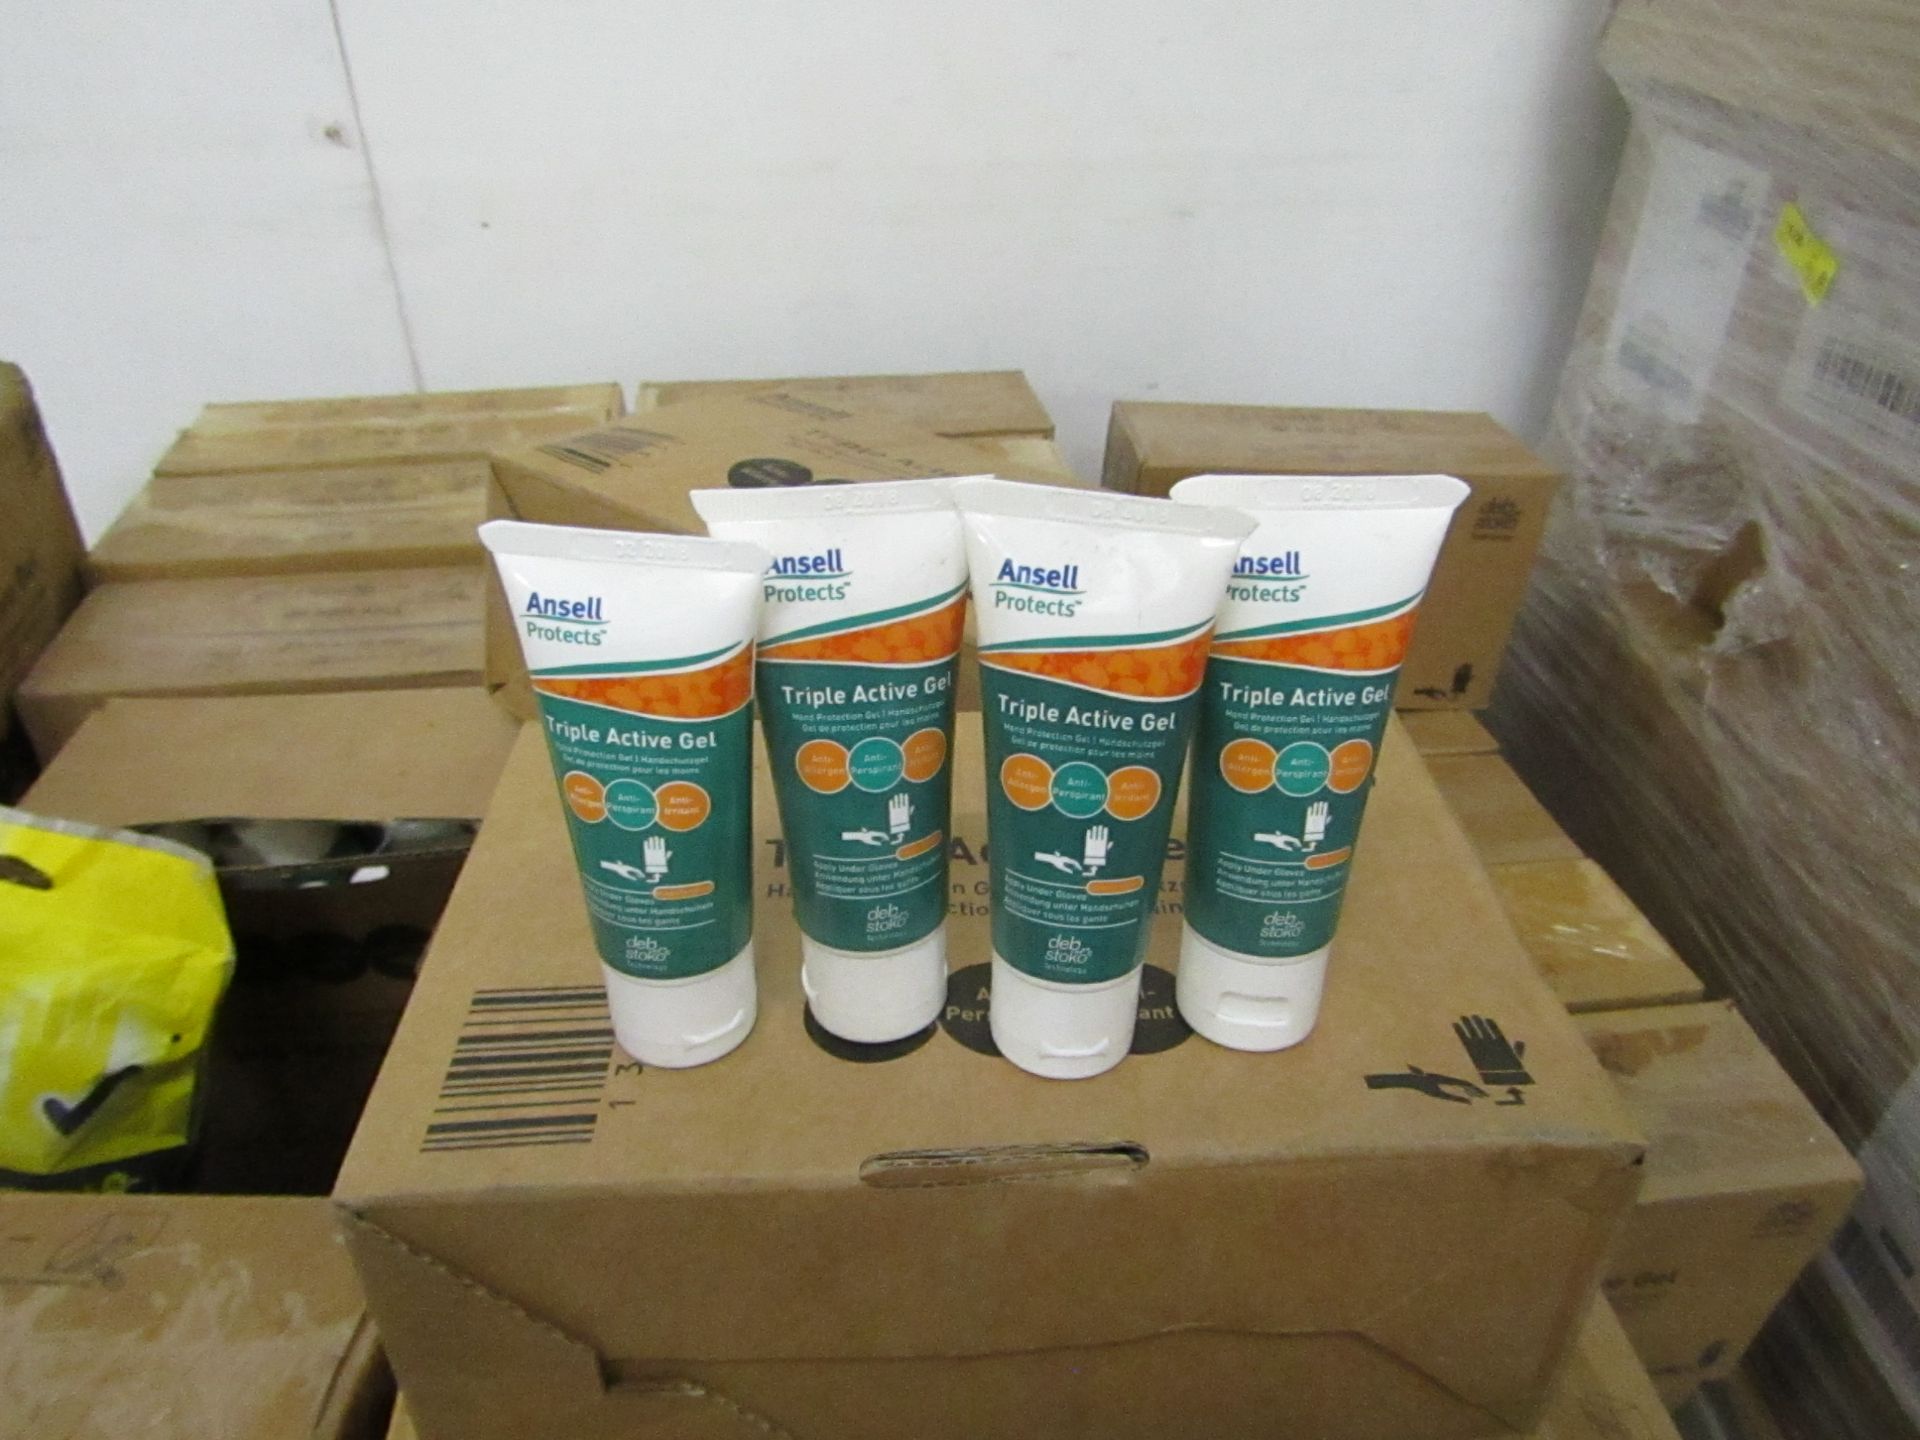 5x Boxes Containing 24 Units Per Box Being : Ansell Protects - Triple Active Hand Gel ( 30ml Tubes )